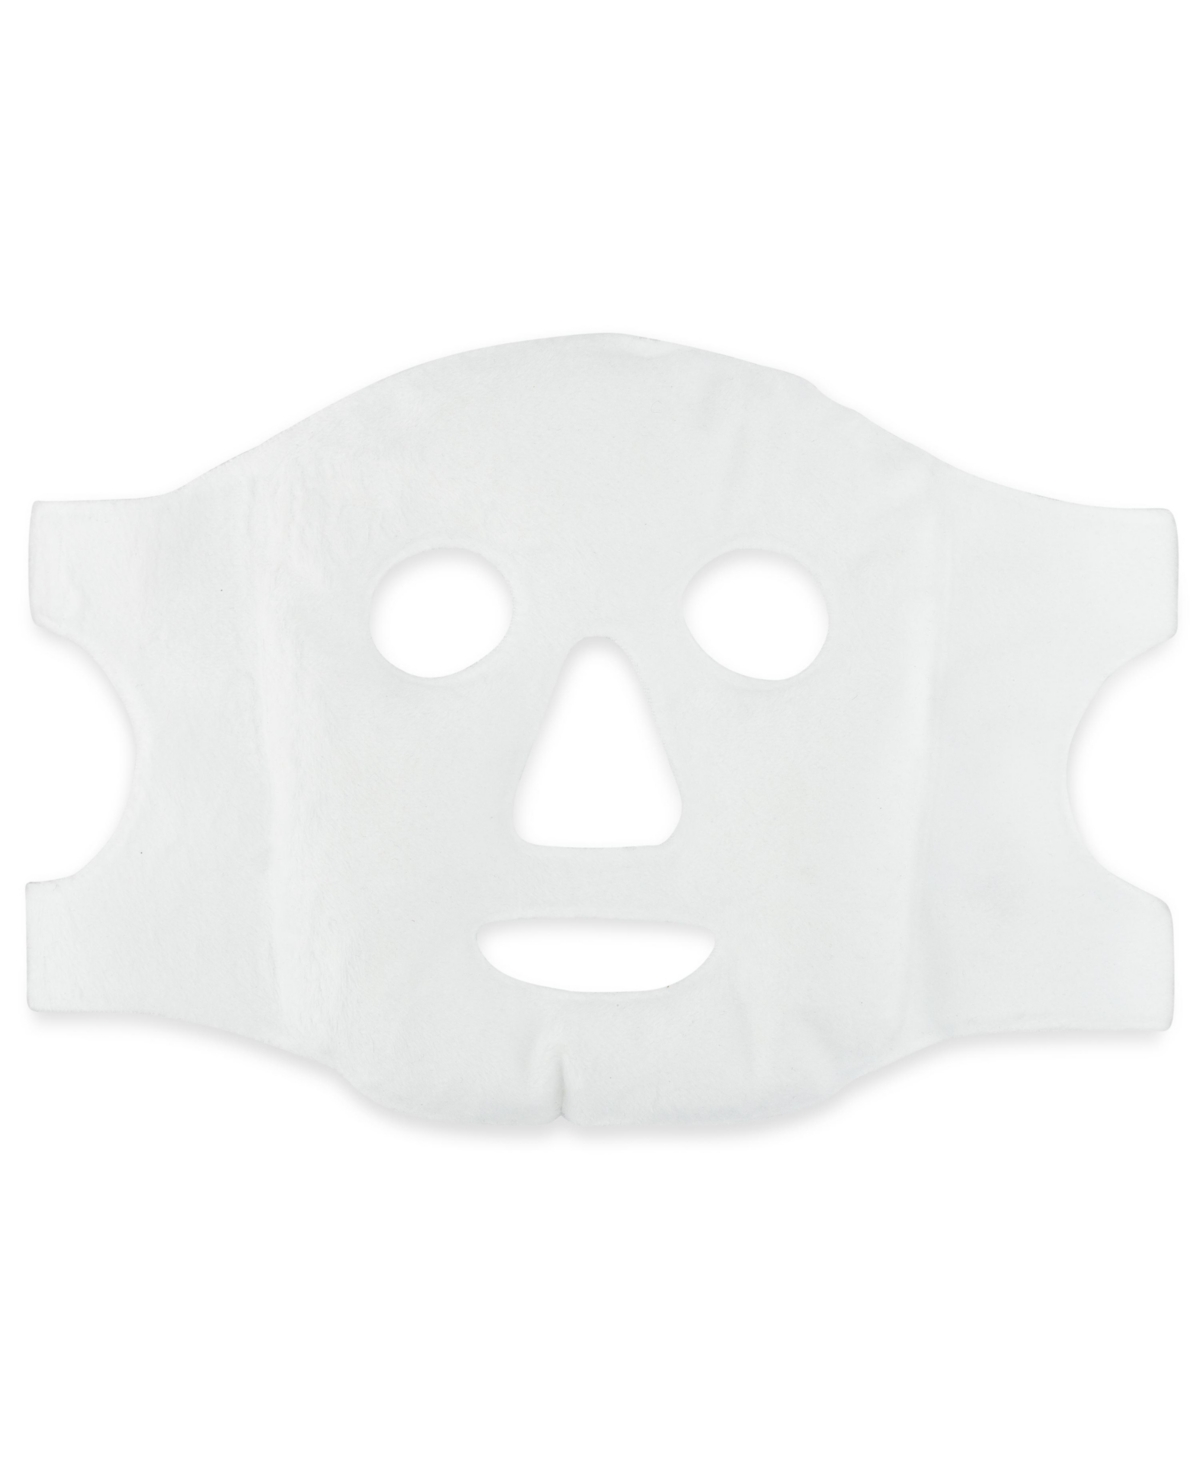 Solaris Laboratories Ny Multi-use Heat And Ice Therapy Face Mask In White